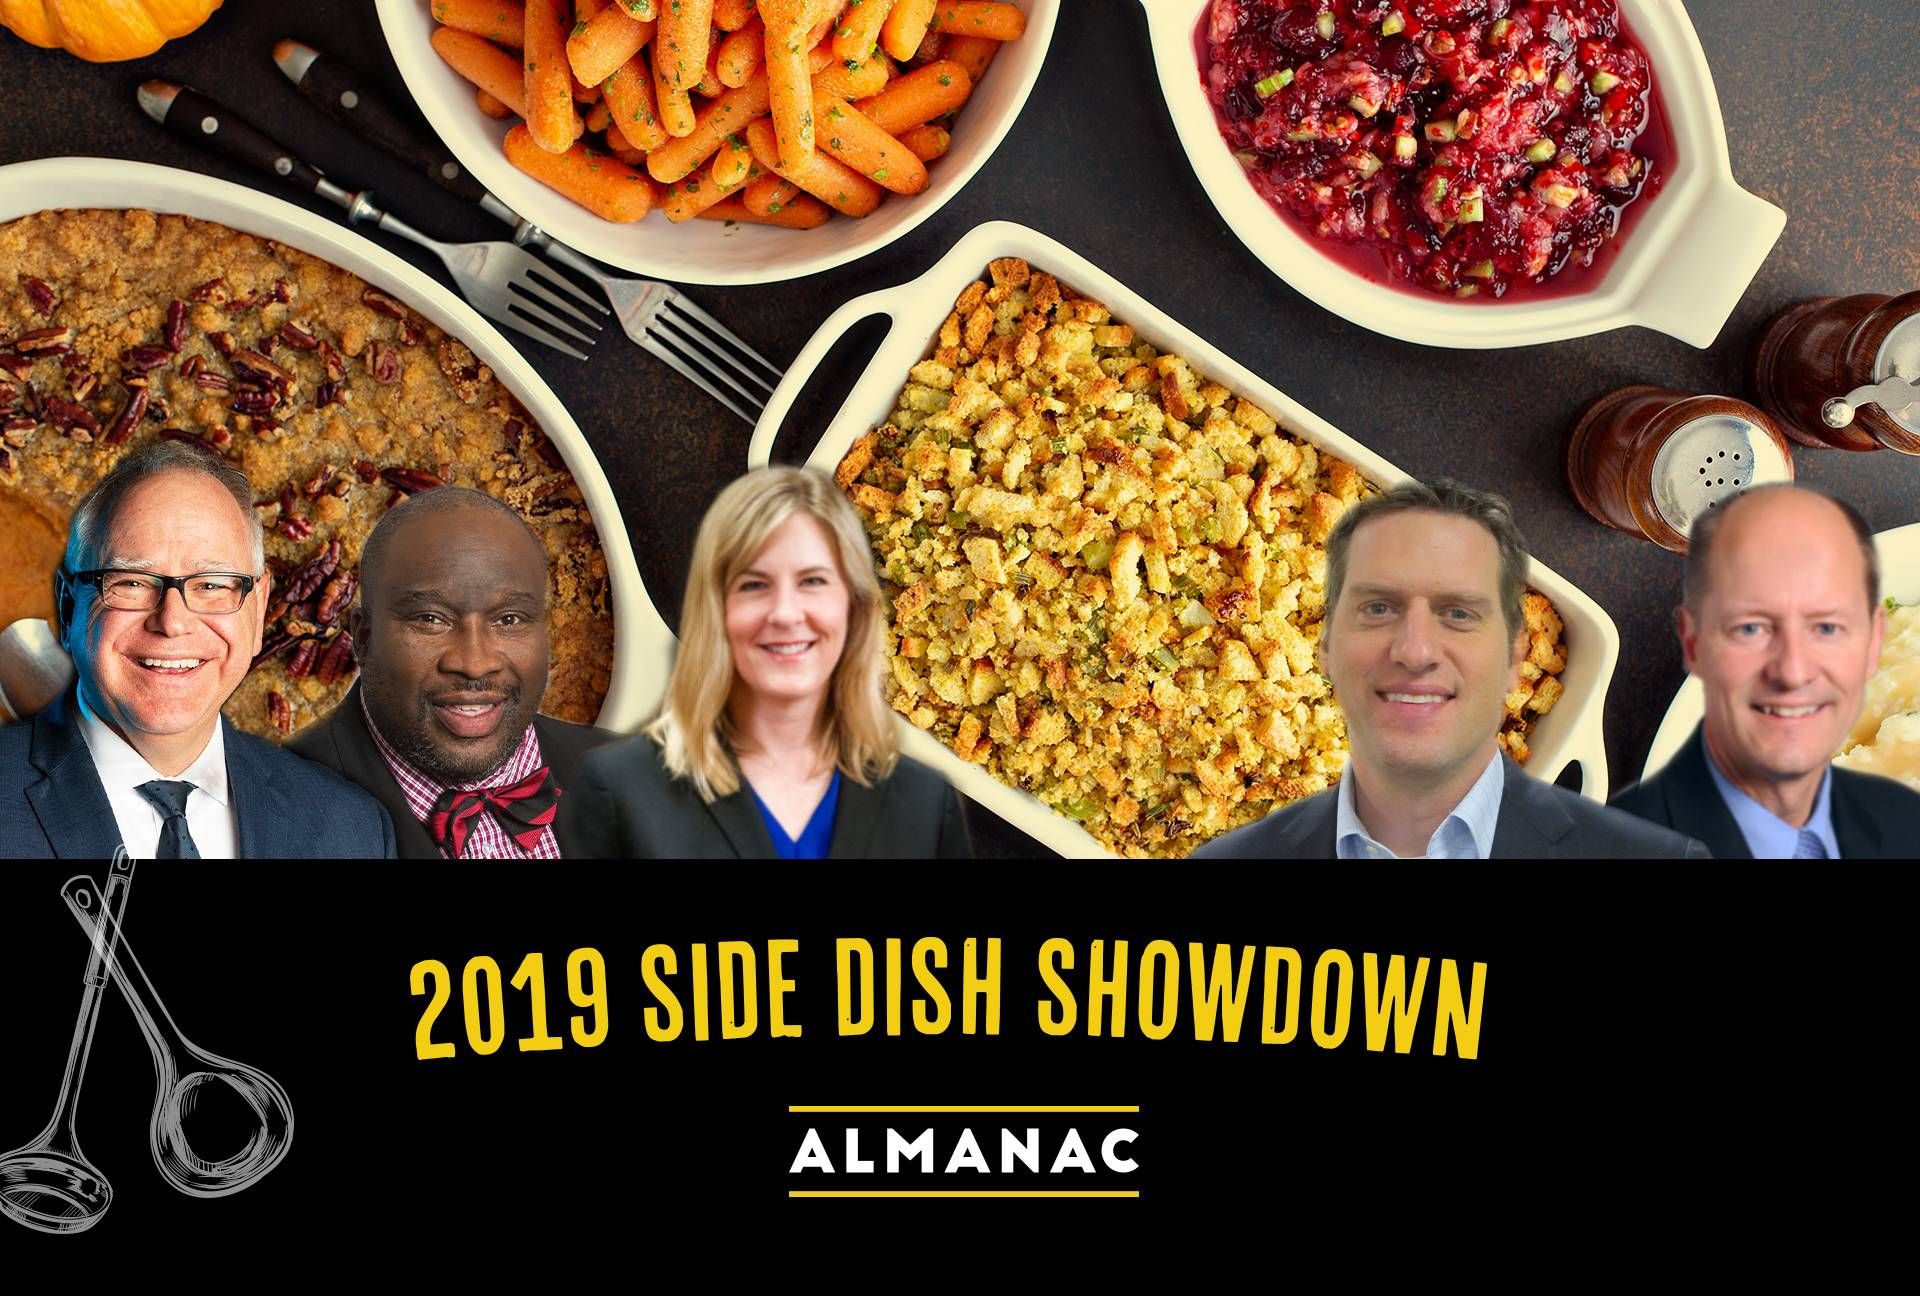 Which legislative leader's side dish is the tastiest of them all?